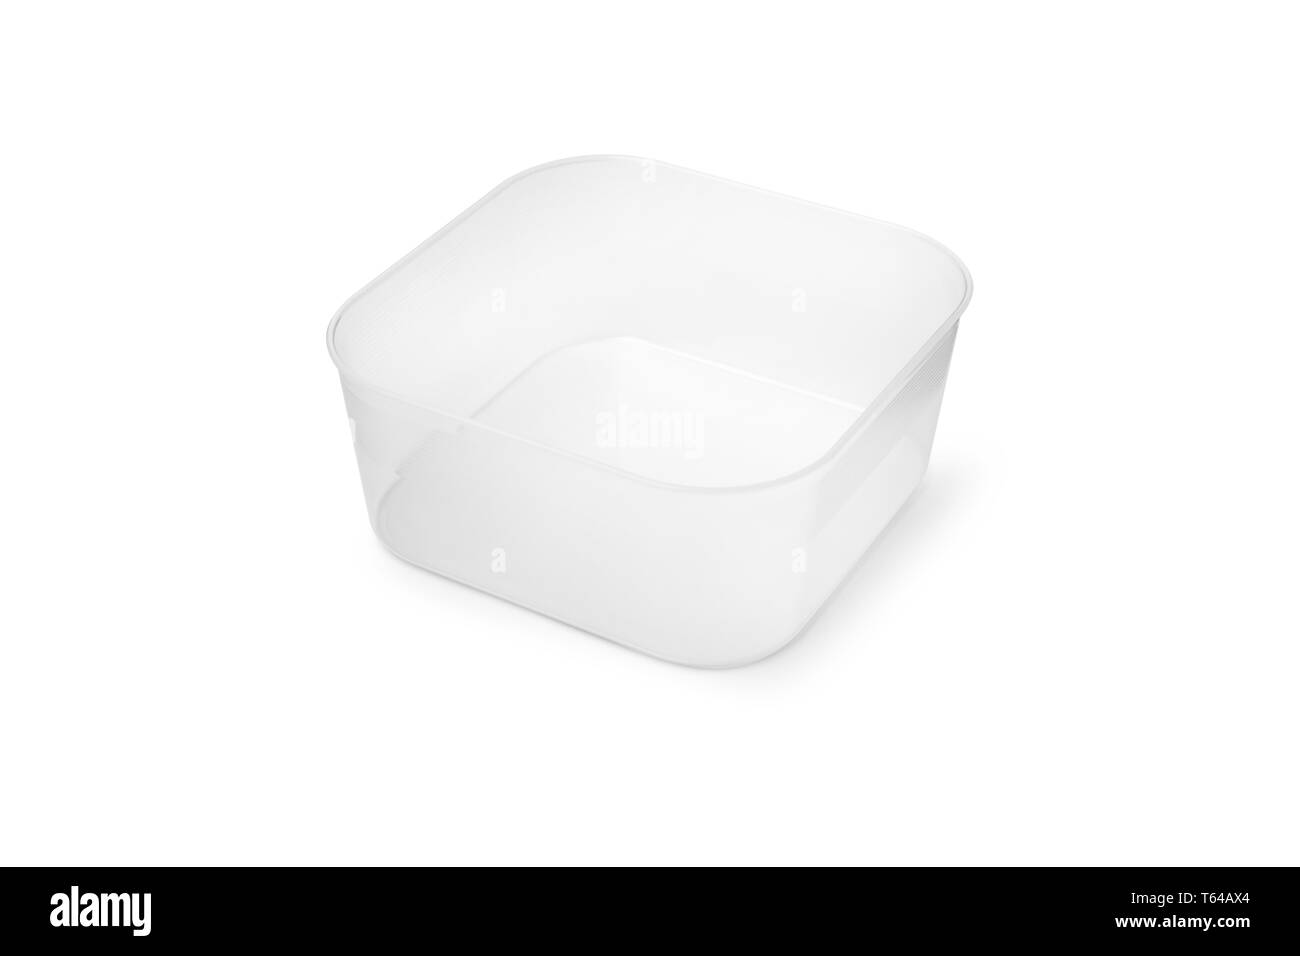 Plastic food storage containers on a white background. With clipping path. Stock Photo